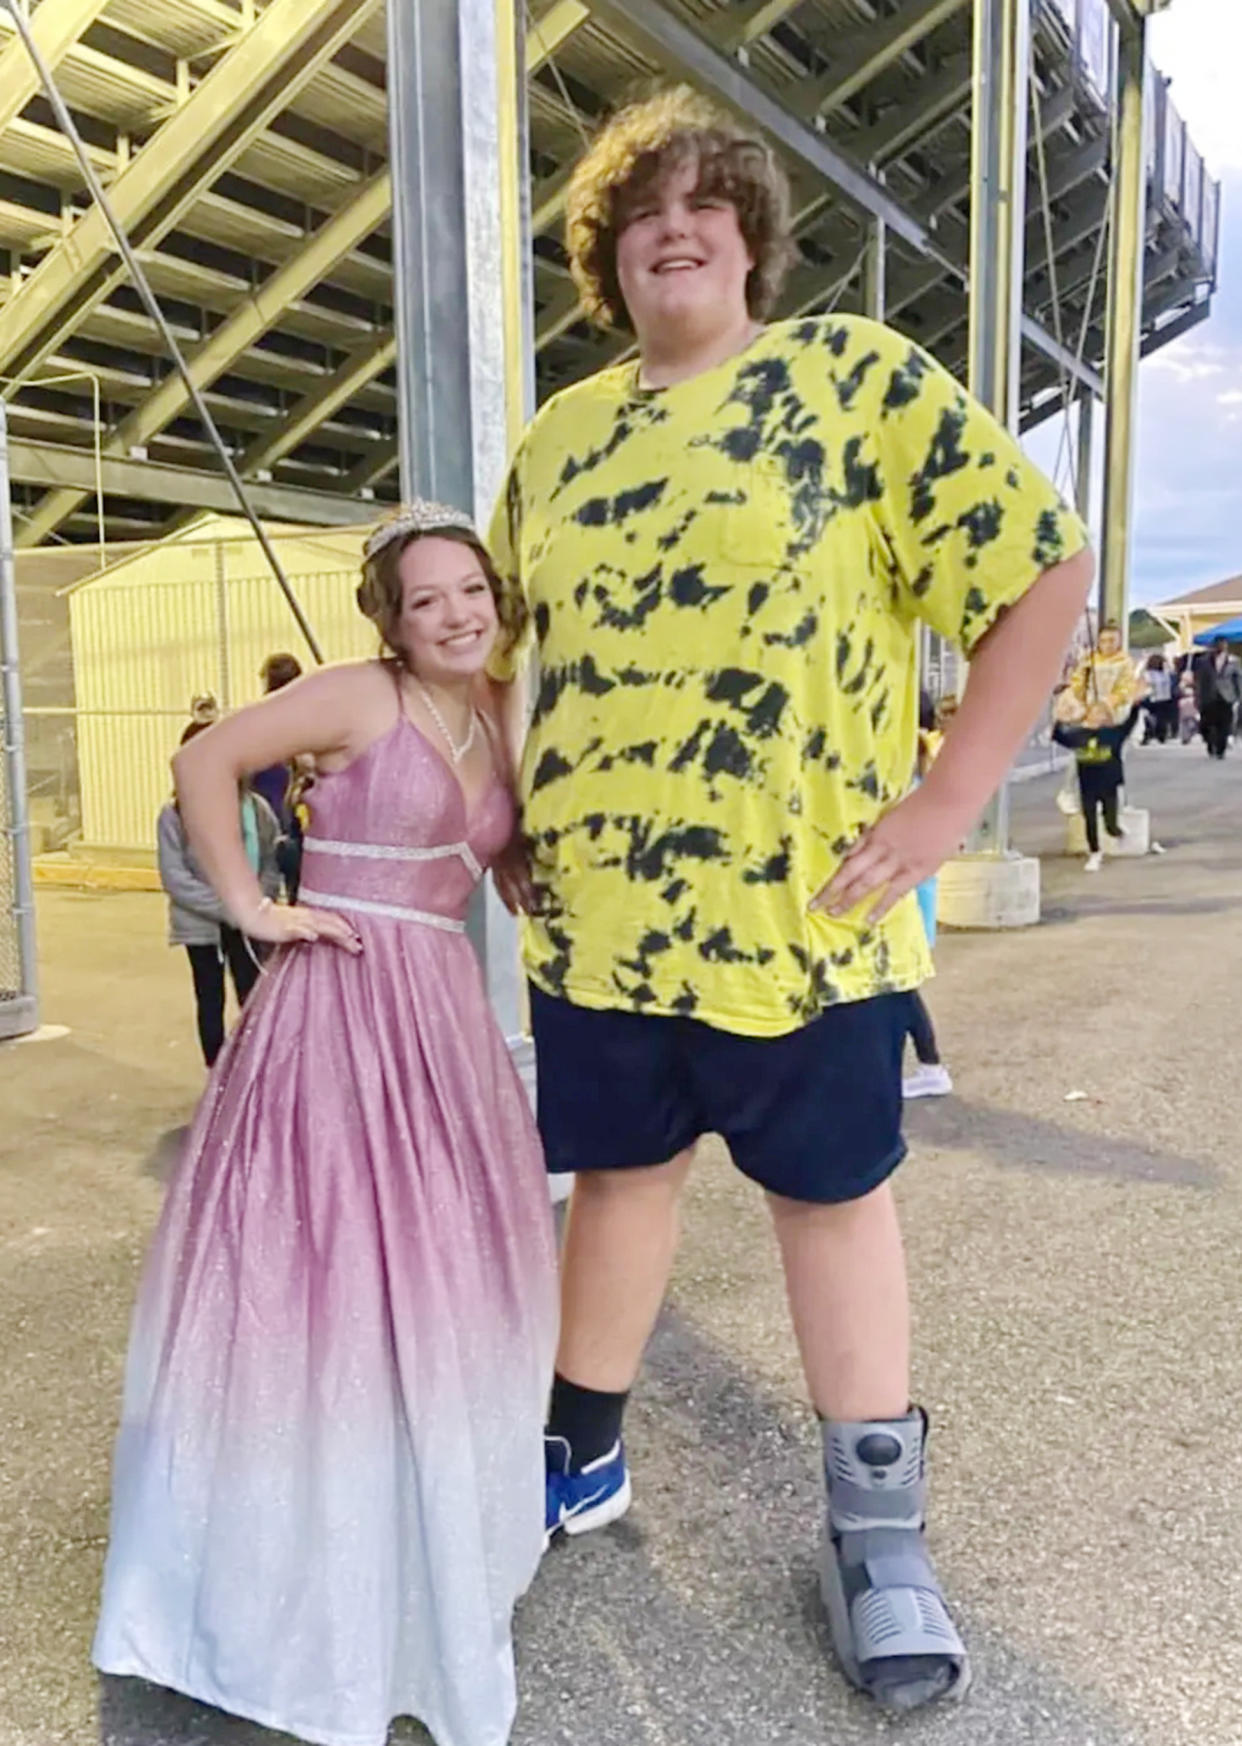 Eric Jr. posed with his friend Ashlynn at homecoming. He sprained his ankle playing football — an injury that likely could have been avoided if he had cleats.  (Courtesy Rebecca Kilburn)